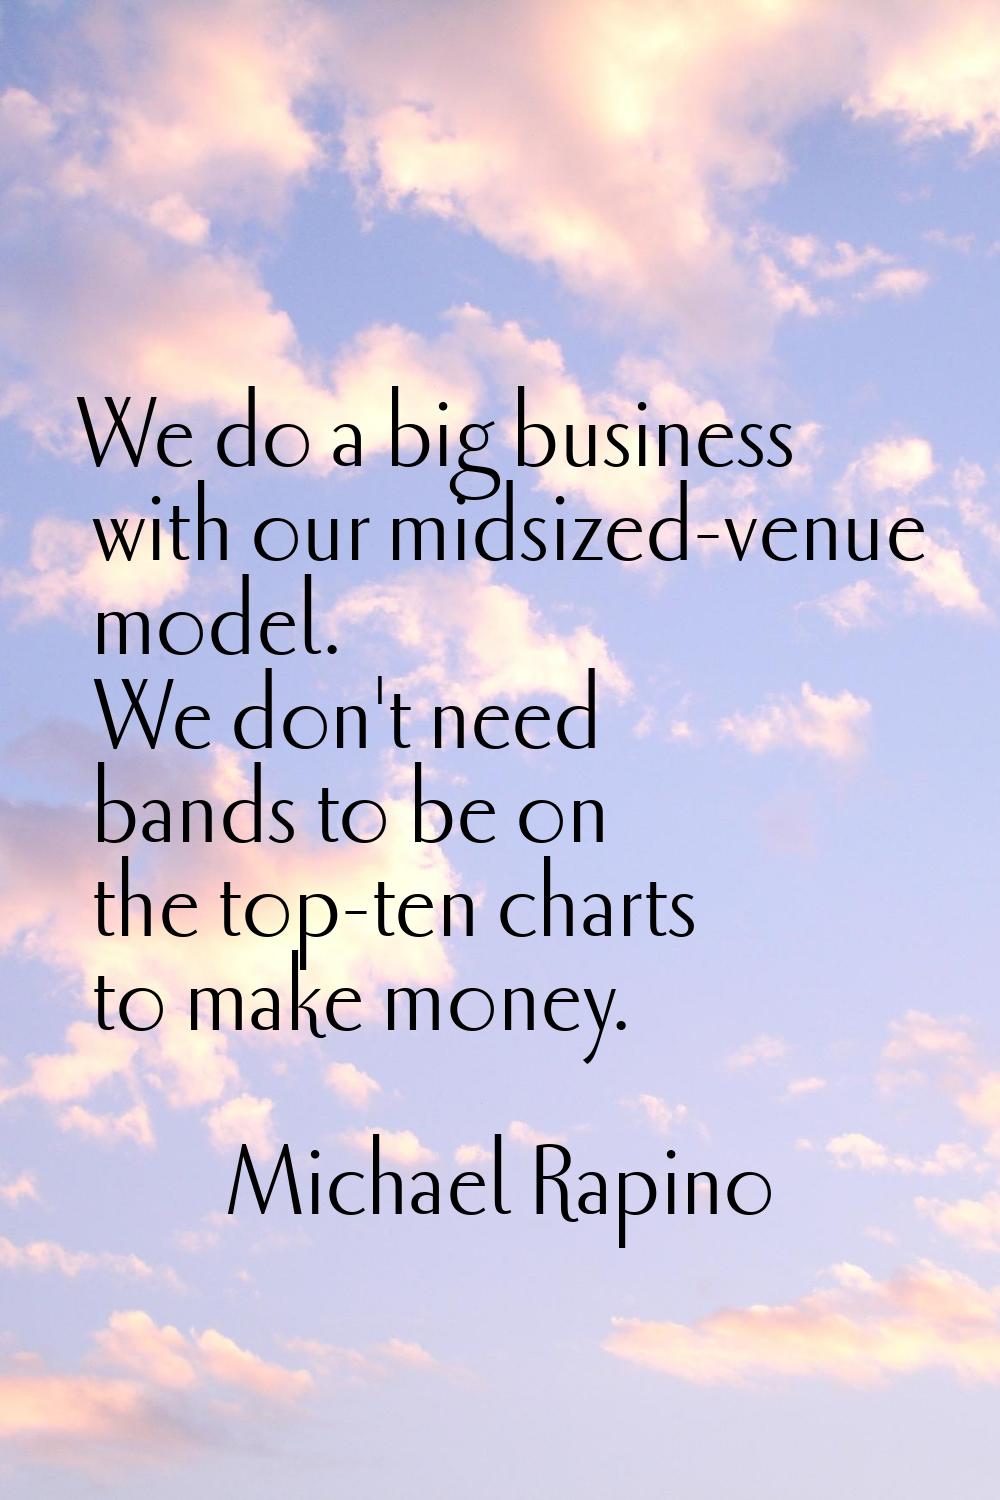 We do a big business with our midsized-venue model. We don't need bands to be on the top-ten charts